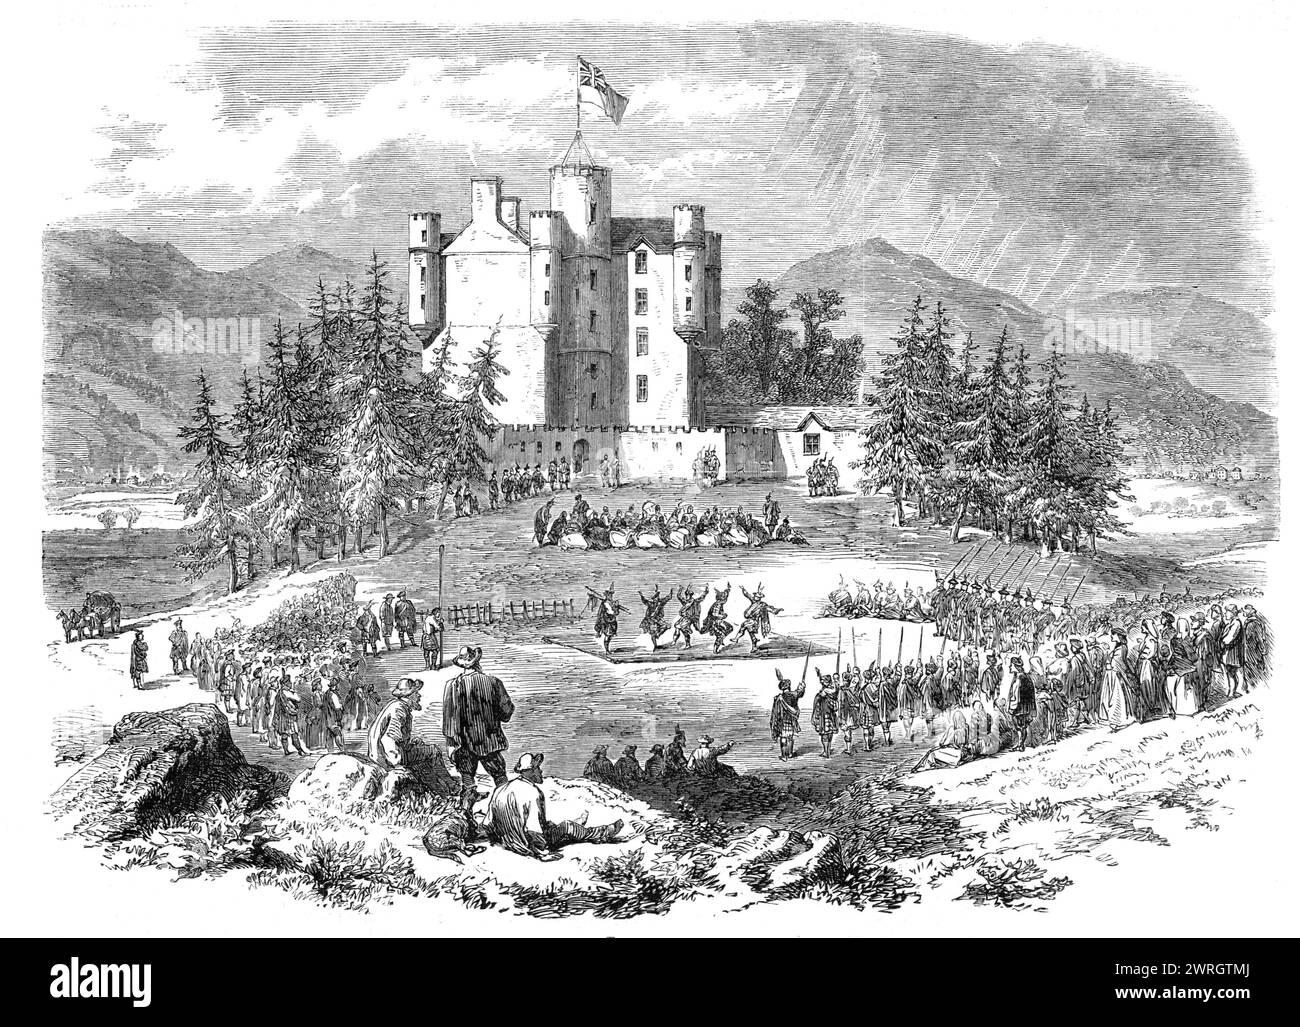 The Gathering of the Highland Clans at Braemar Castle, in the presence of the Prince and Princess of Wales, 1864. Engraving from a sketch by Mr. Colebrooke Stockdale, of the '...annual muster of the sturdy Highlandmen for their favourite athletic sports and feats of strength or skill...The chief interest lay in the competition for the prizes open to &quot;all comers&quot;...Donald Dinnie...sent the stone over 28 ft. 8 in., and threw the hammer 84 ft. 4 in. The tossing of the caber was, however, the most interesting of any of the competitions; and in this the renowned Donald came off victorious Stock Photo